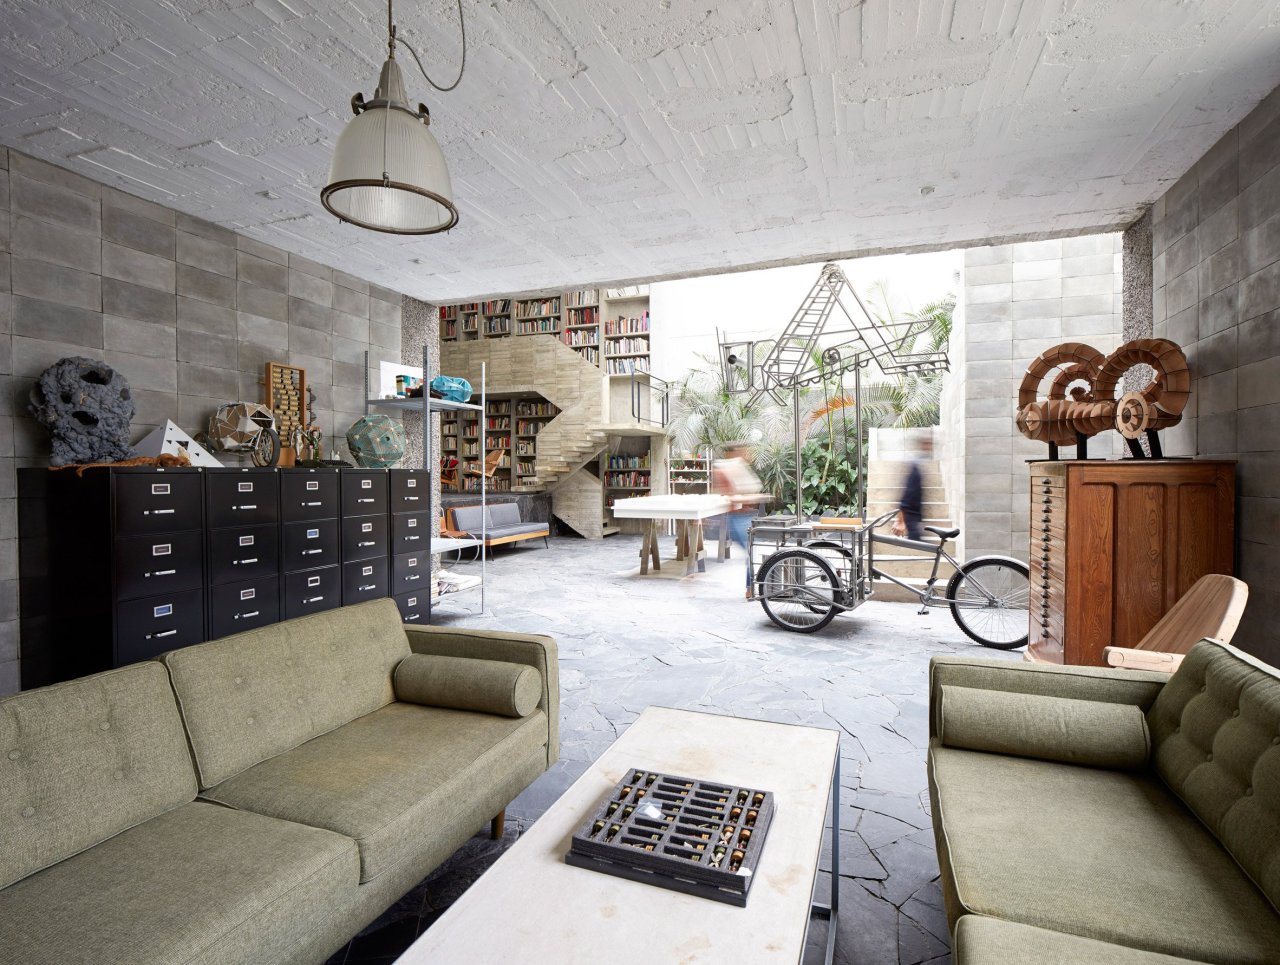 thekhooll:  The Home and Studio of Artists Pedros Reyes and Carla Fernandez in México